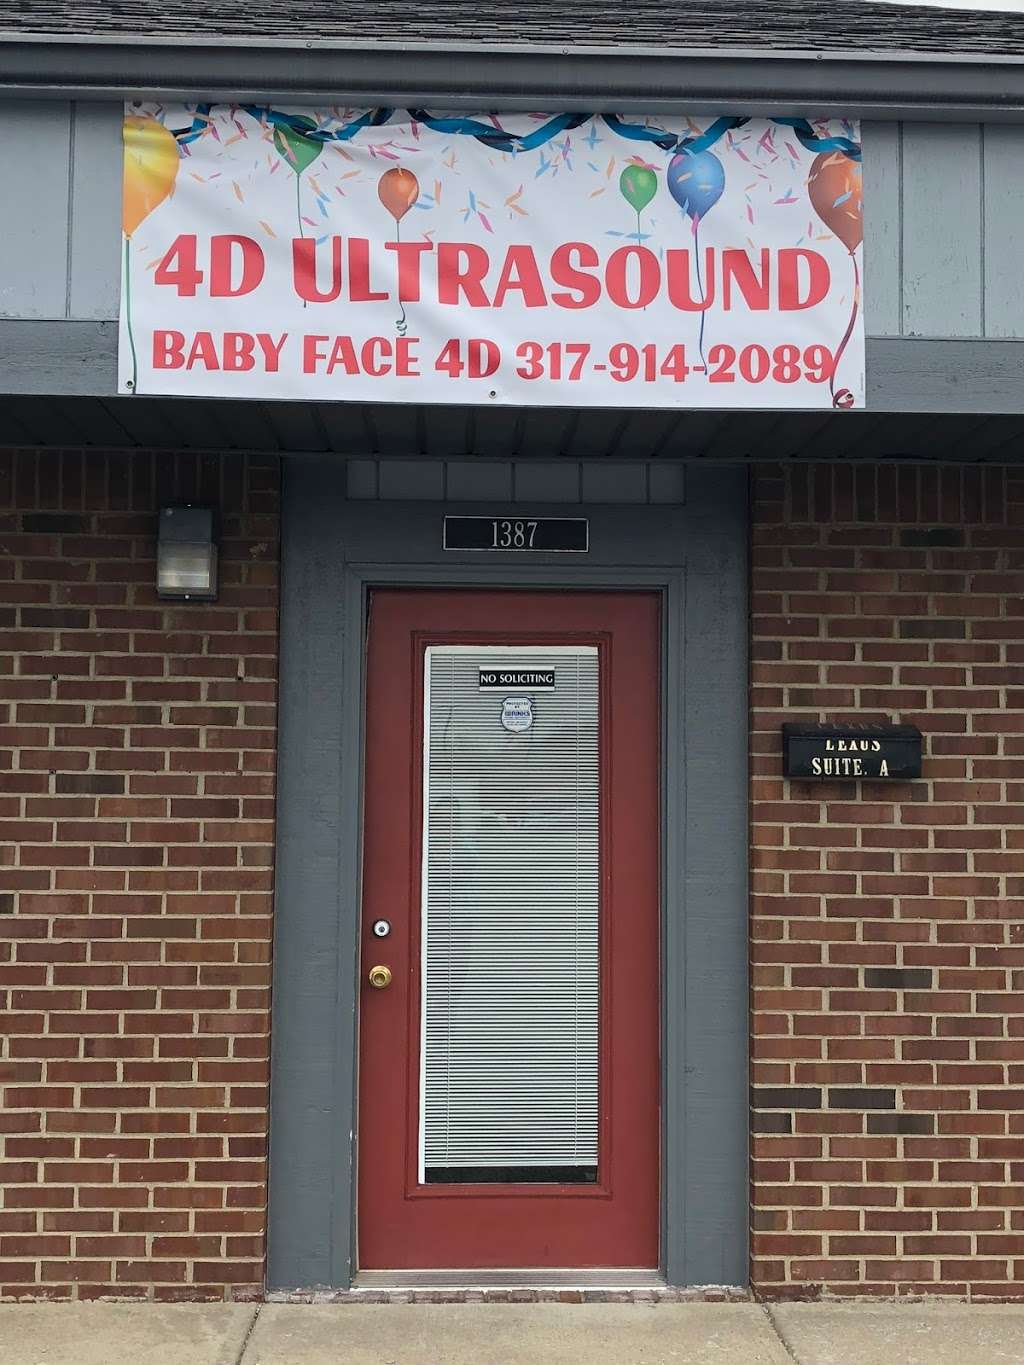 Baby Face 4D Ultrasound | 1387 Shadeland Ave suite c, Indianapolis, IN 46219 | Phone: (317) 914-2089